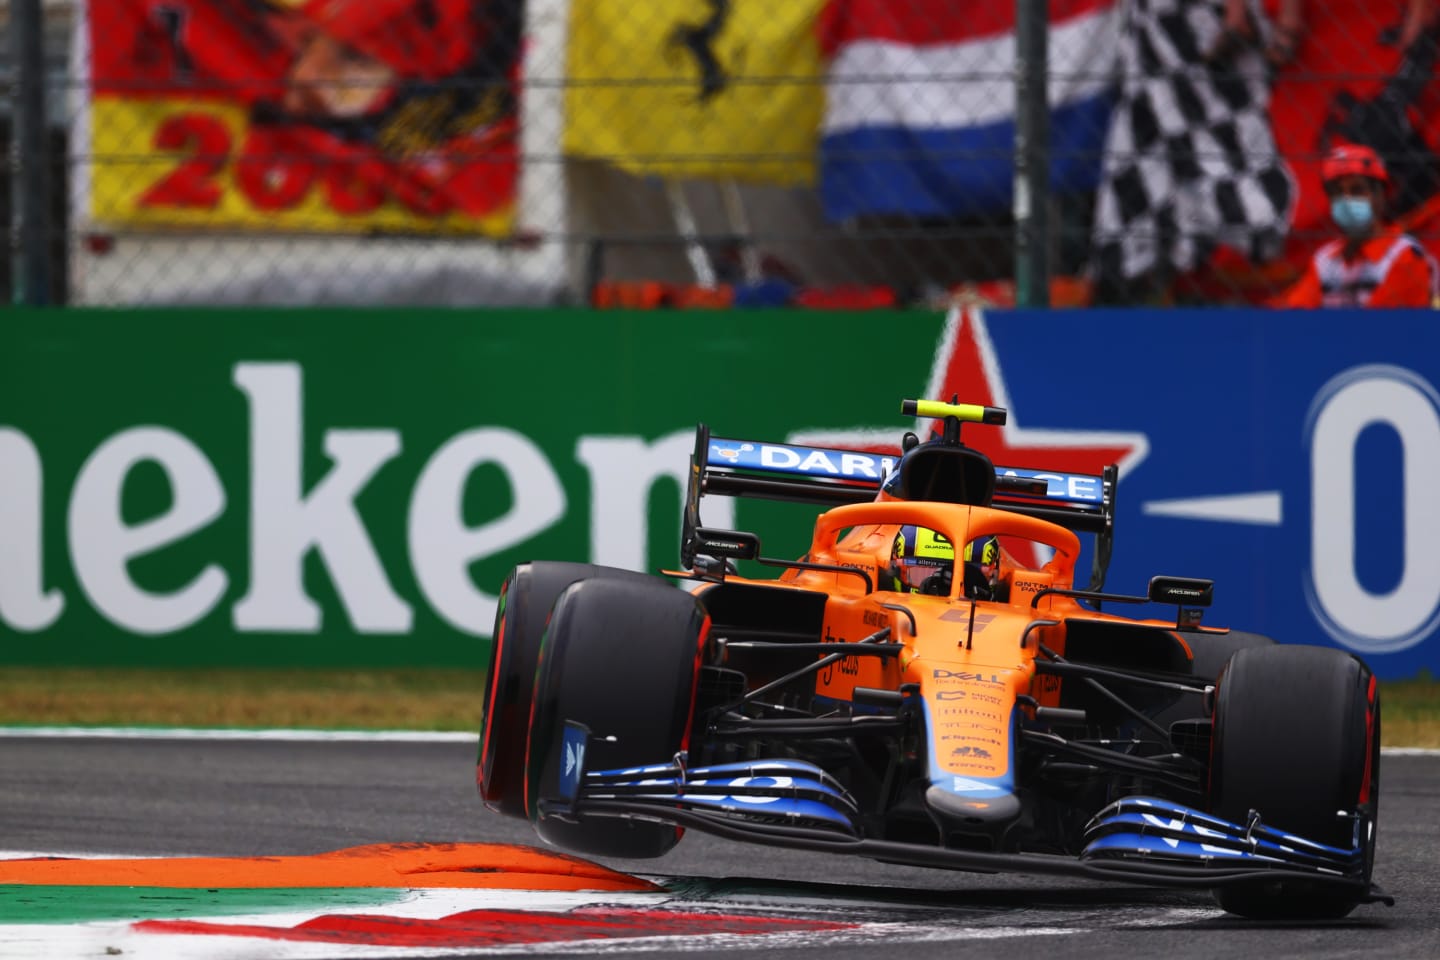 MONZA, ITALY - SEPTEMBER 10: Lando Norris of Great Britain driving the (4) McLaren F1 Team MCL35M Mercedes over a kerb during qualifying ahead of the F1 Grand Prix of Italy at Autodromo di Monza on September 10, 2021 in Monza, Italy. (Photo by Dan Istitene - Formula 1/Formula 1 via Getty Images)